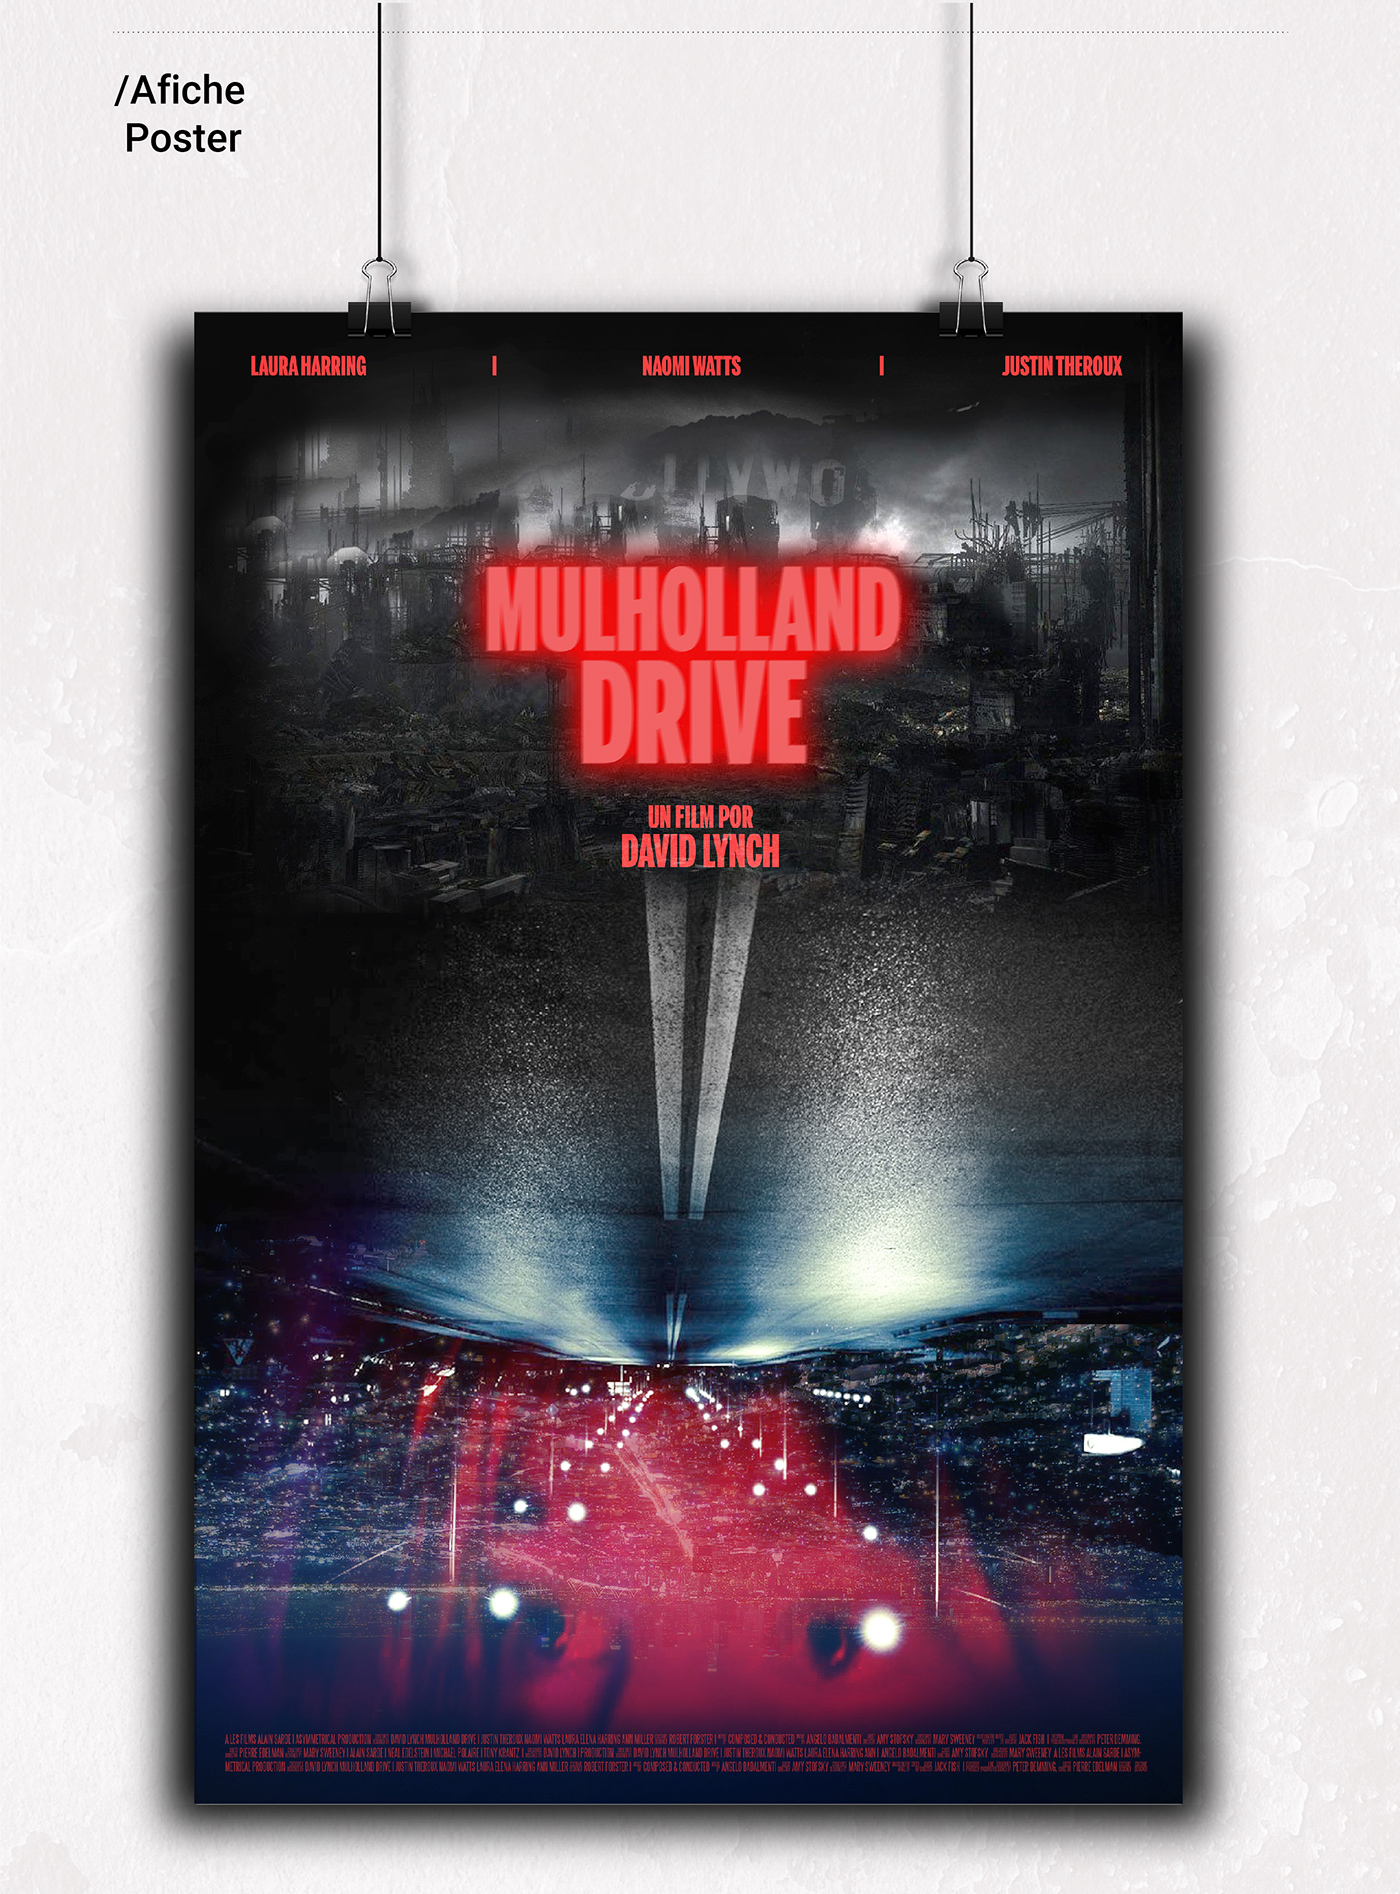 Movie Poster I Mulholland Drive On Behance